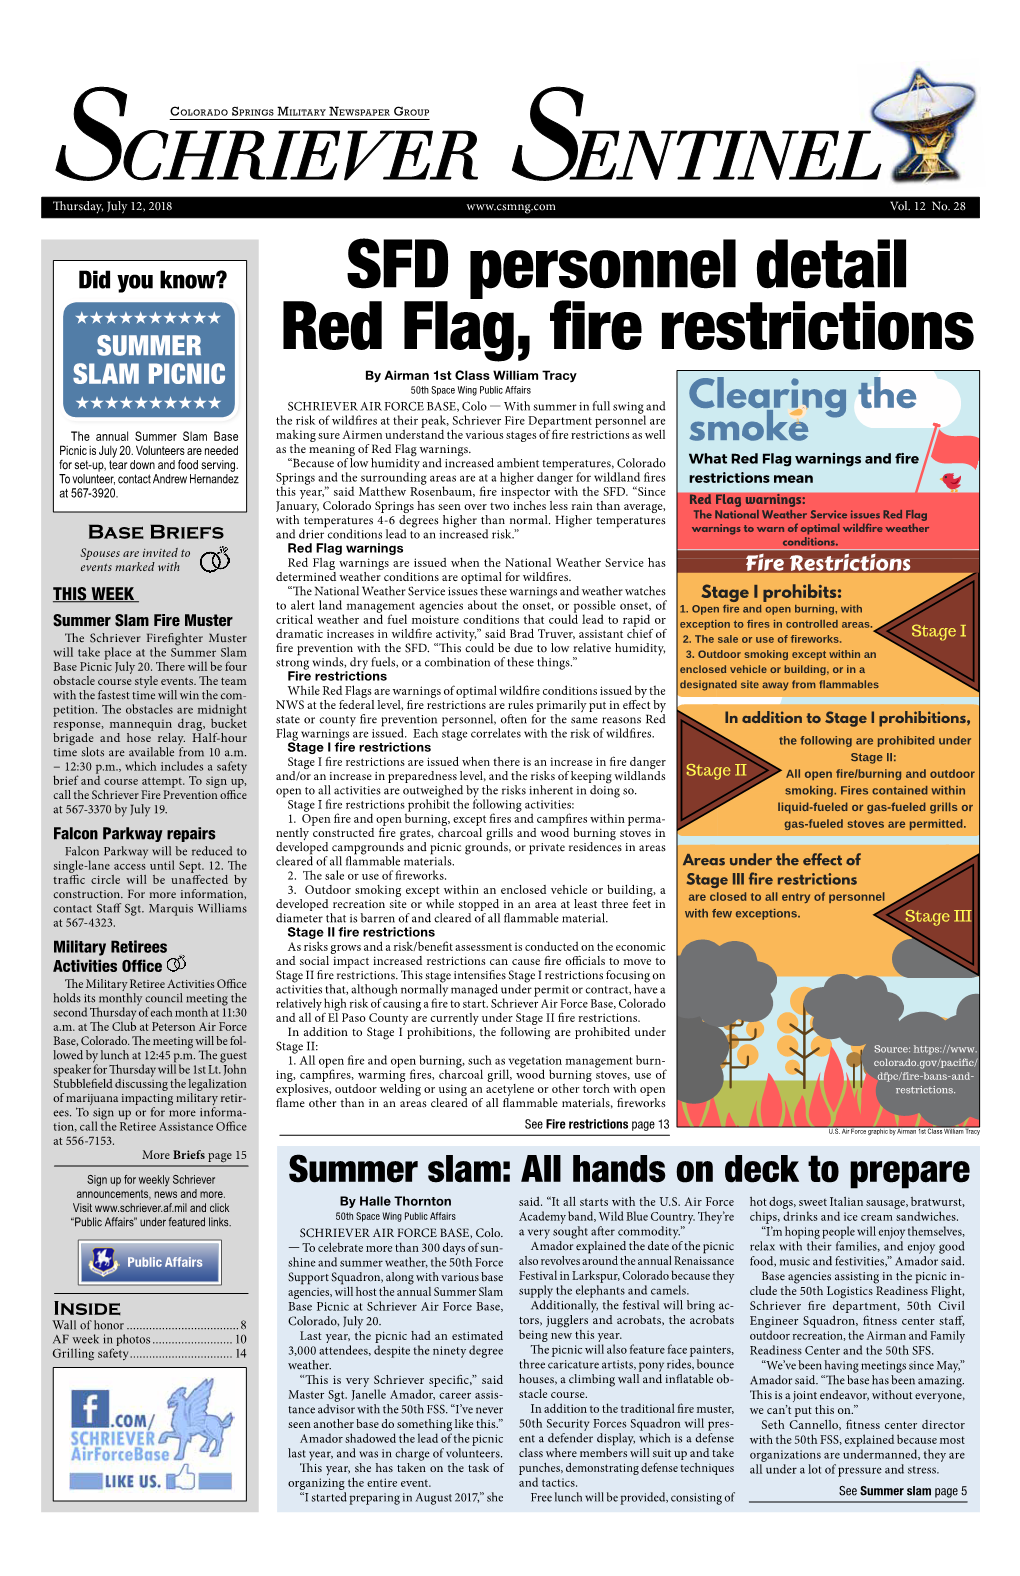 SFD Personnel Detail Red Flag, Fire Restrictions